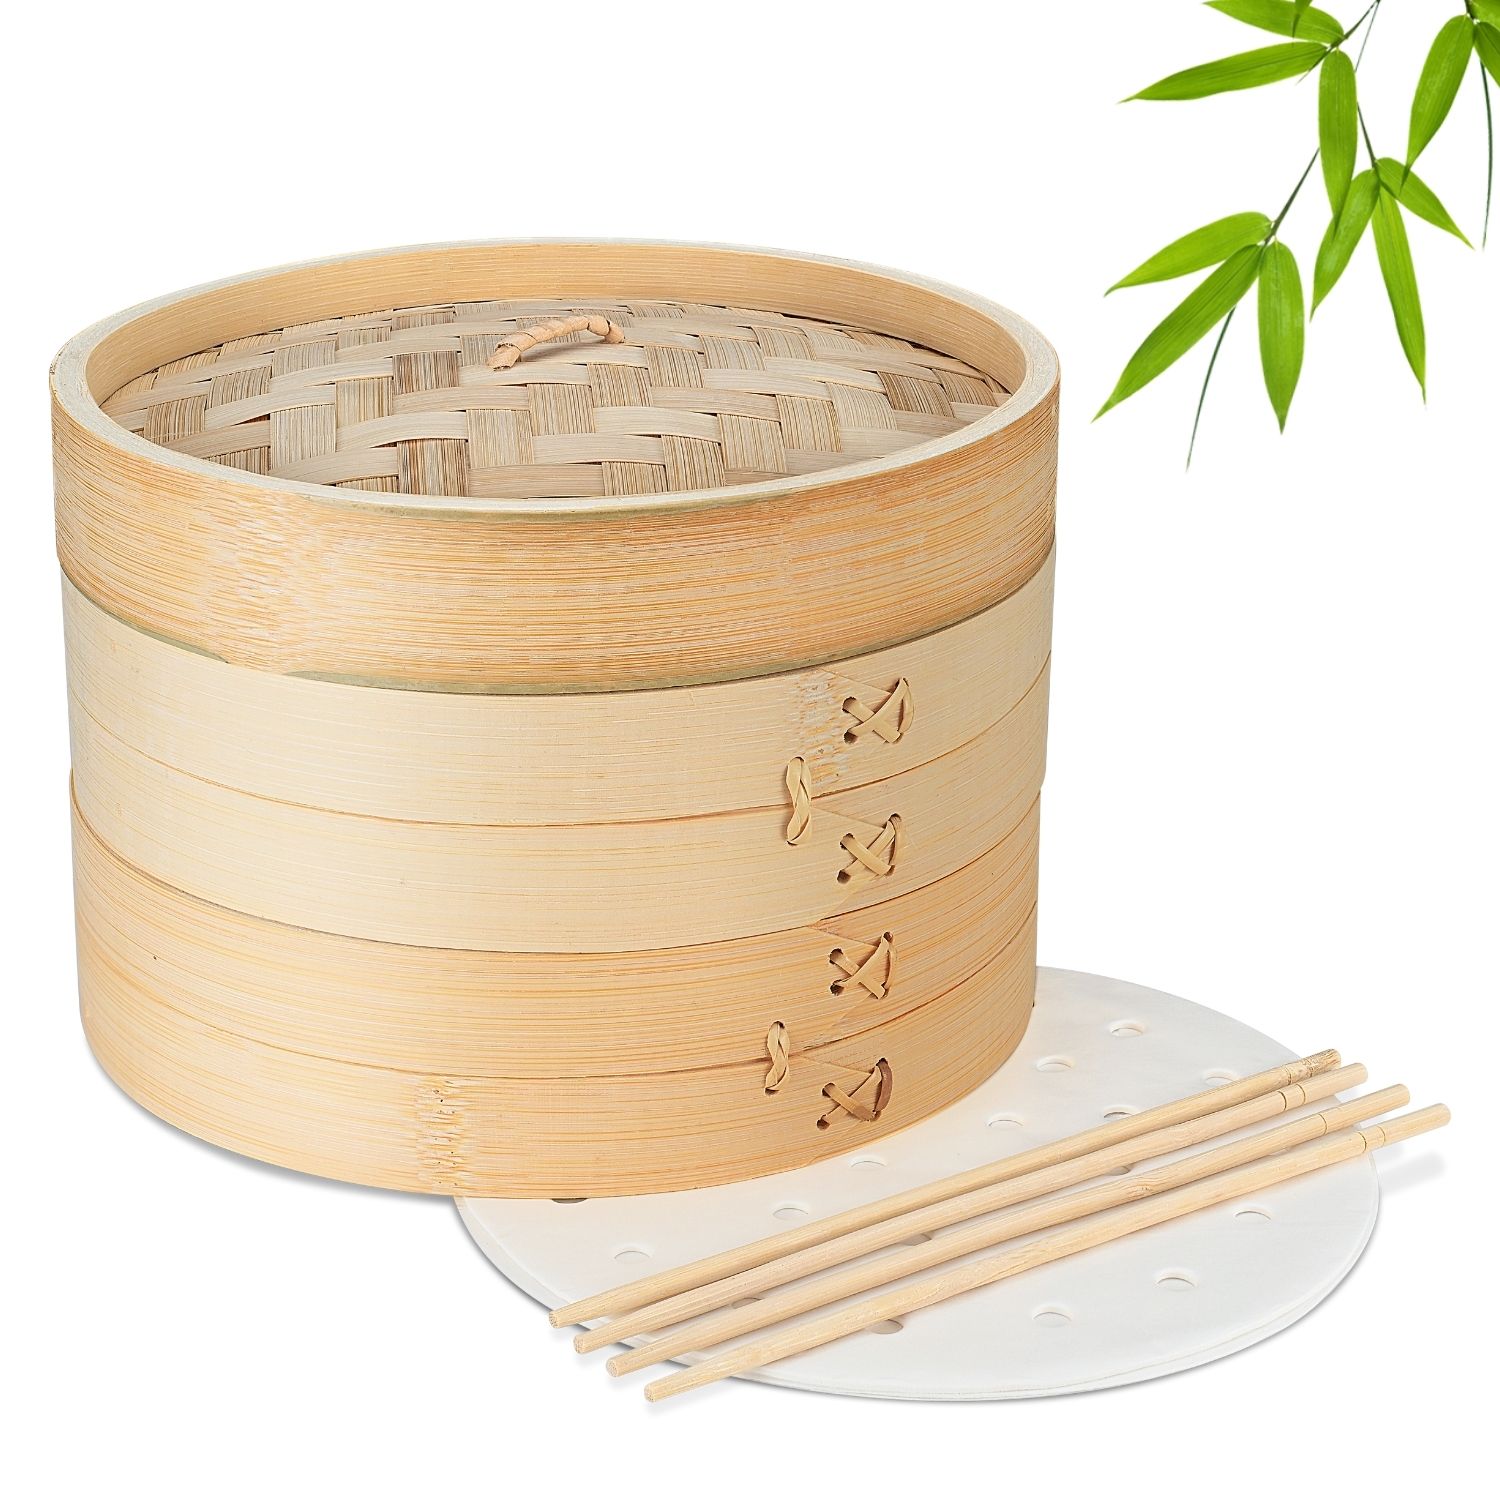 Bamboo Steamer Basket Set (10 inch), 50 x Steamer Liners and 2 Pairs of Chopsticks, Steam Baskets for DimSum Dumplings , Rice, Vegetables, Fish and Meat